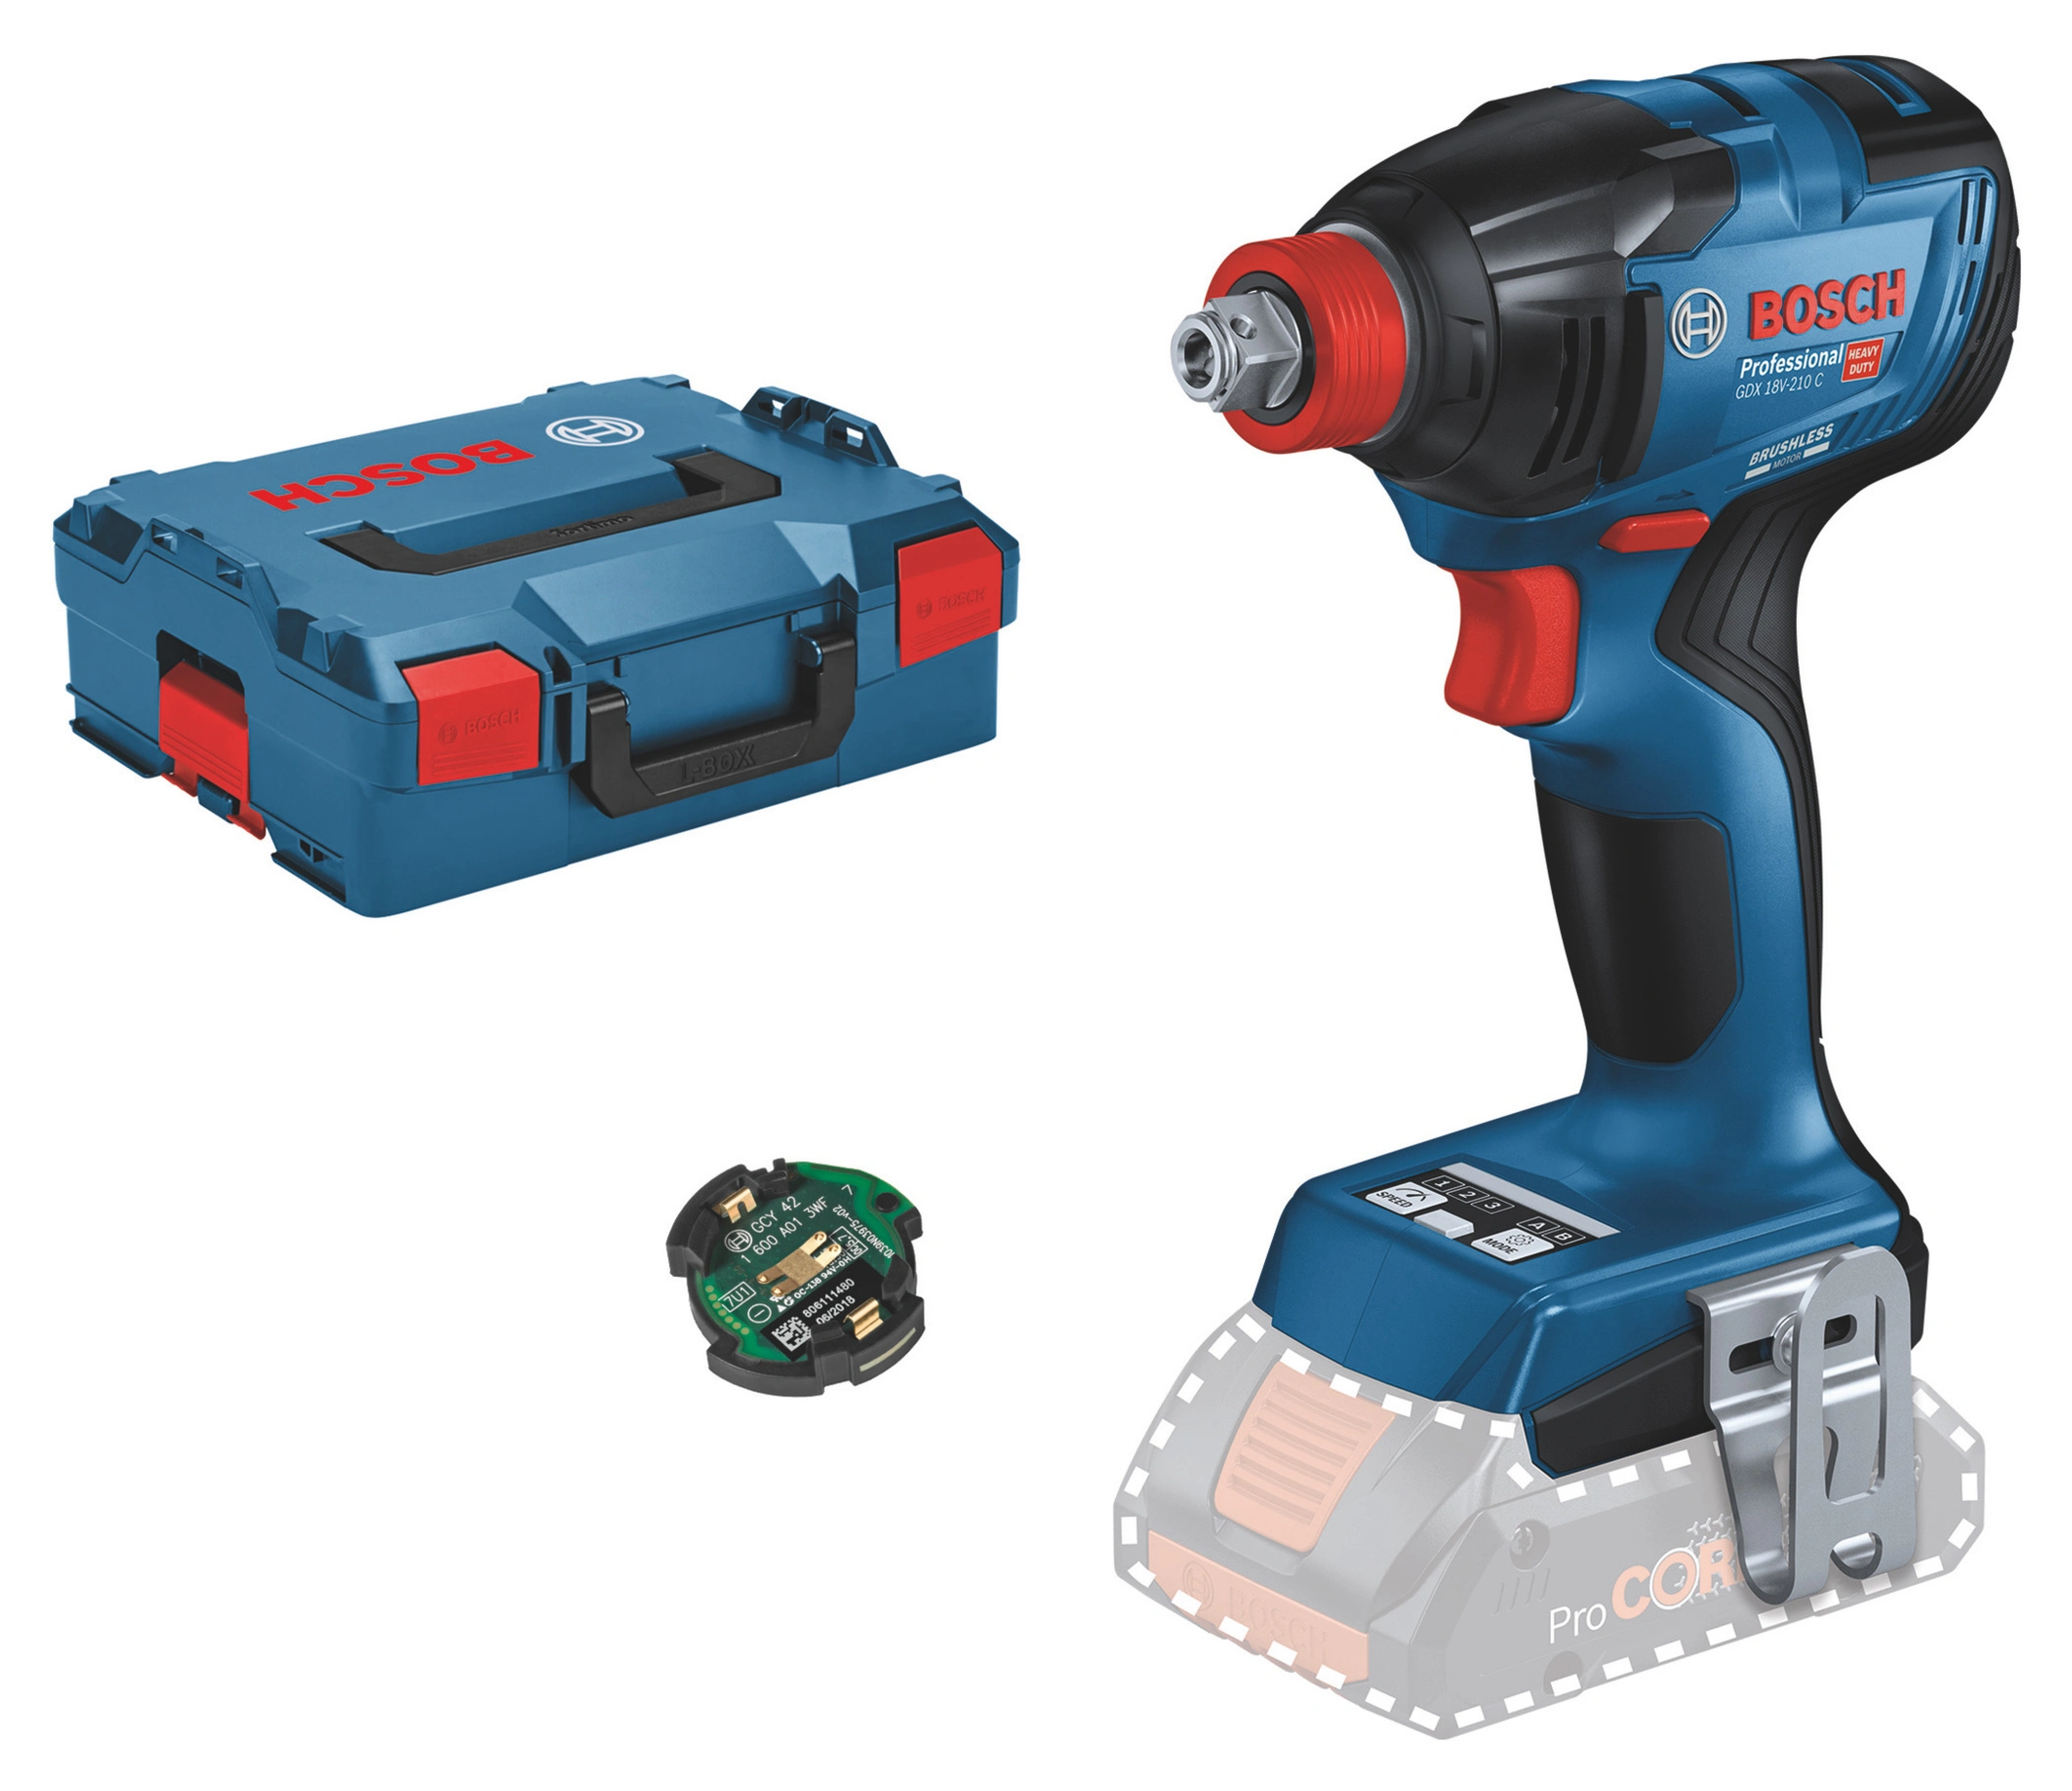 An impact wrench that changes everything? BOSCH GDX 18V-210 C combines two  tools in one! 